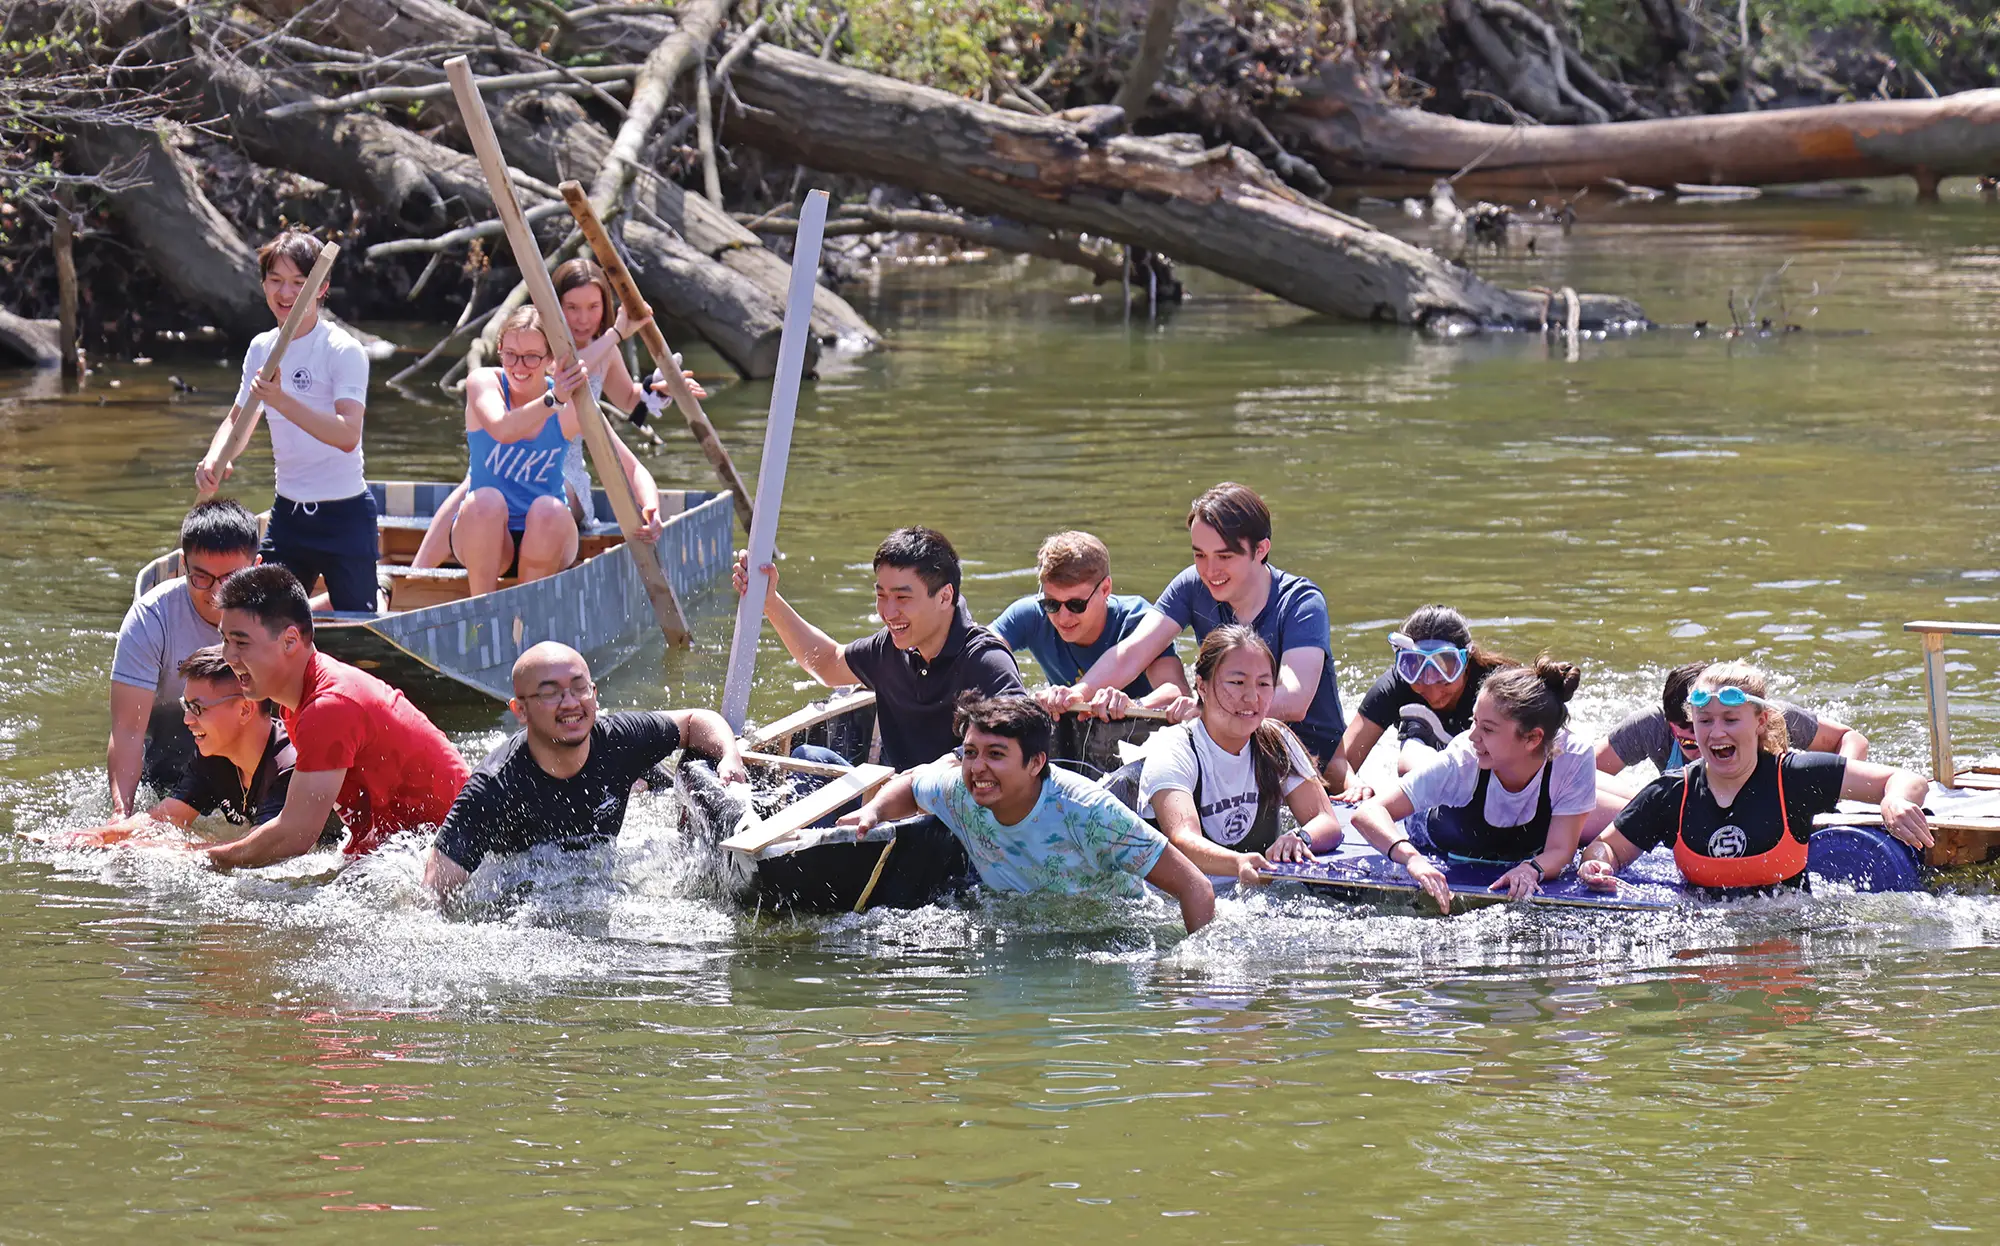 Students on boats, rafts and waking in a river